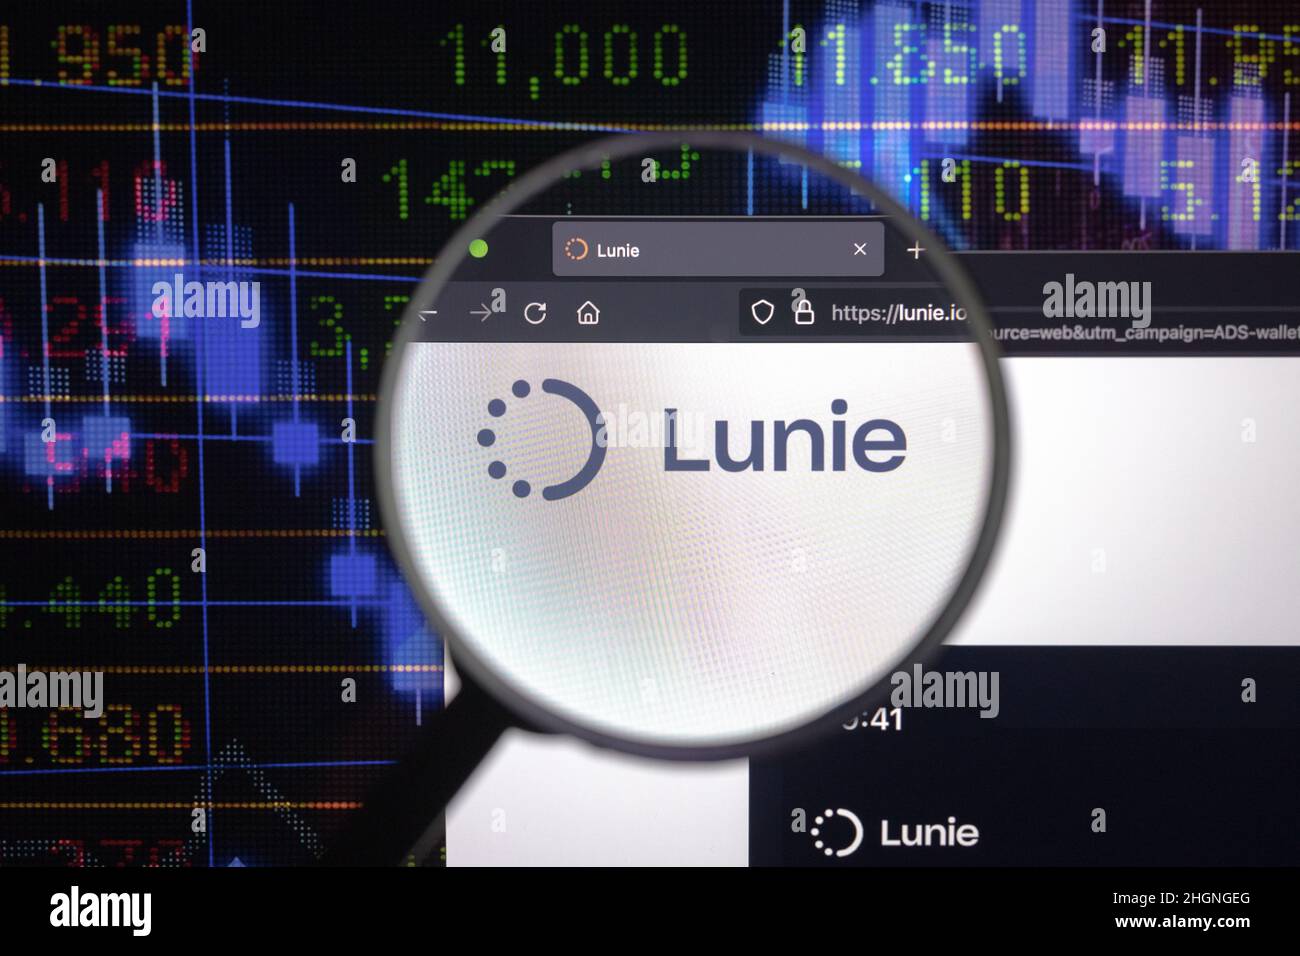 Lunie crypto company logo on a website, seen on a computer screen through a magnifying glass. Stock Photo